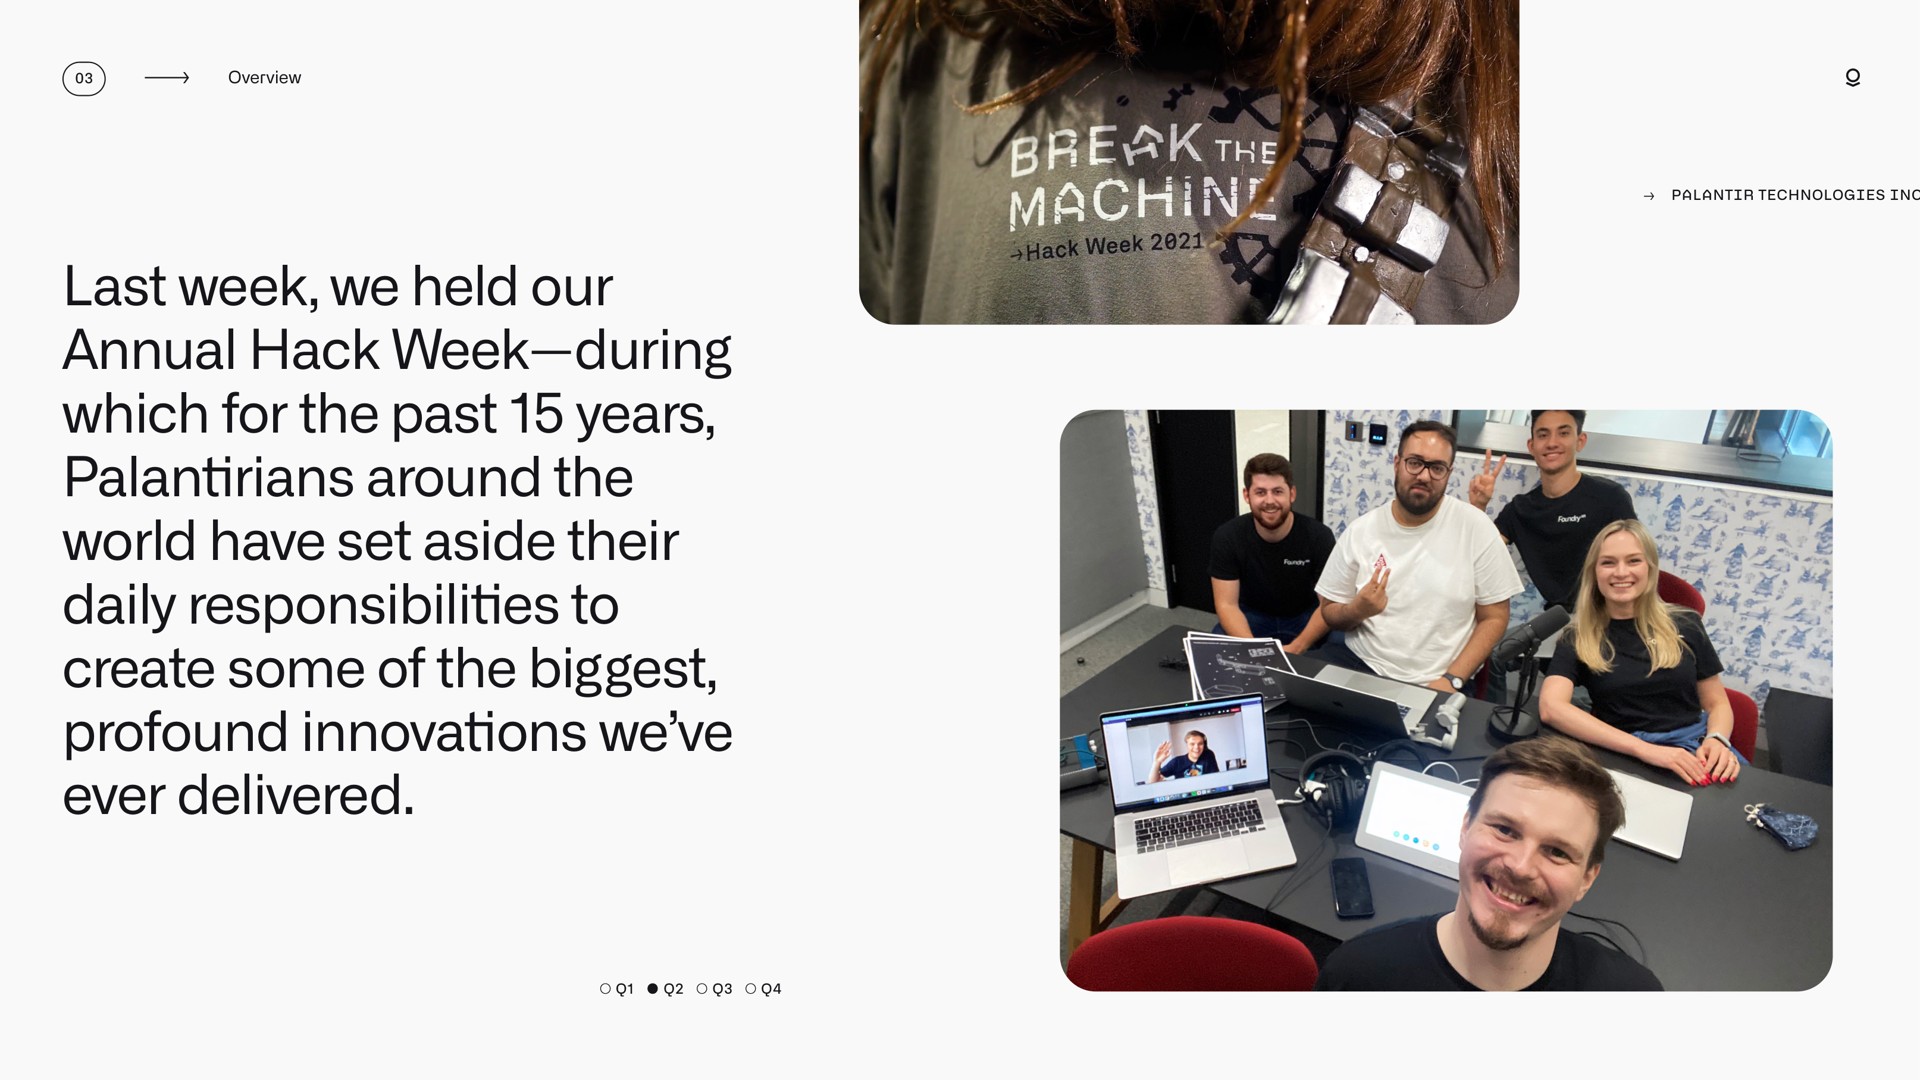 last week we held our annual hack week during which for the past years around the world have set aside their daily responsibilities to create some of the biggest profound innovations we ever delivered breck tue | Palantir